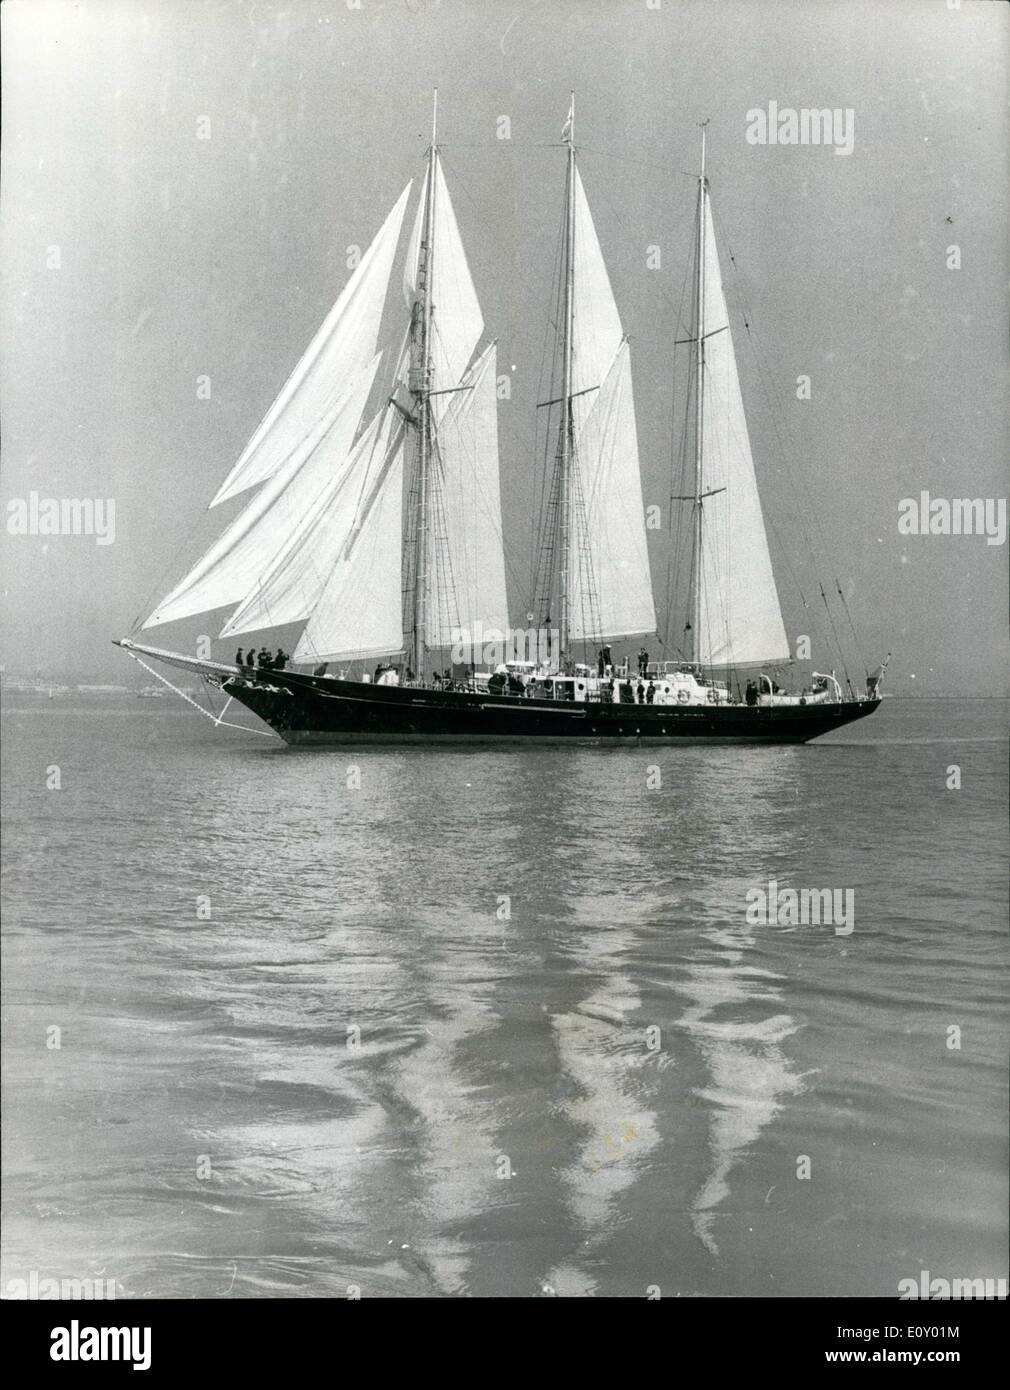 Apr. 04, 1968 - S.T.A. Schooners Sail Together For First Time: ''Sir Winston Churchill'' and ''Malcolm Miller'' the Sail Training Association's twin 300-ton topsail met in the Thames Estuary today before proceeding up-river 11 days. The schooners were under sail off Southend this morning, and continured under sail on their journey up-river to Gravesend, where they will moor for the night, The schooners leave Graveend tomorrow, and are expected to arrive at Tower Pier in mid-afternoon Stock Photo